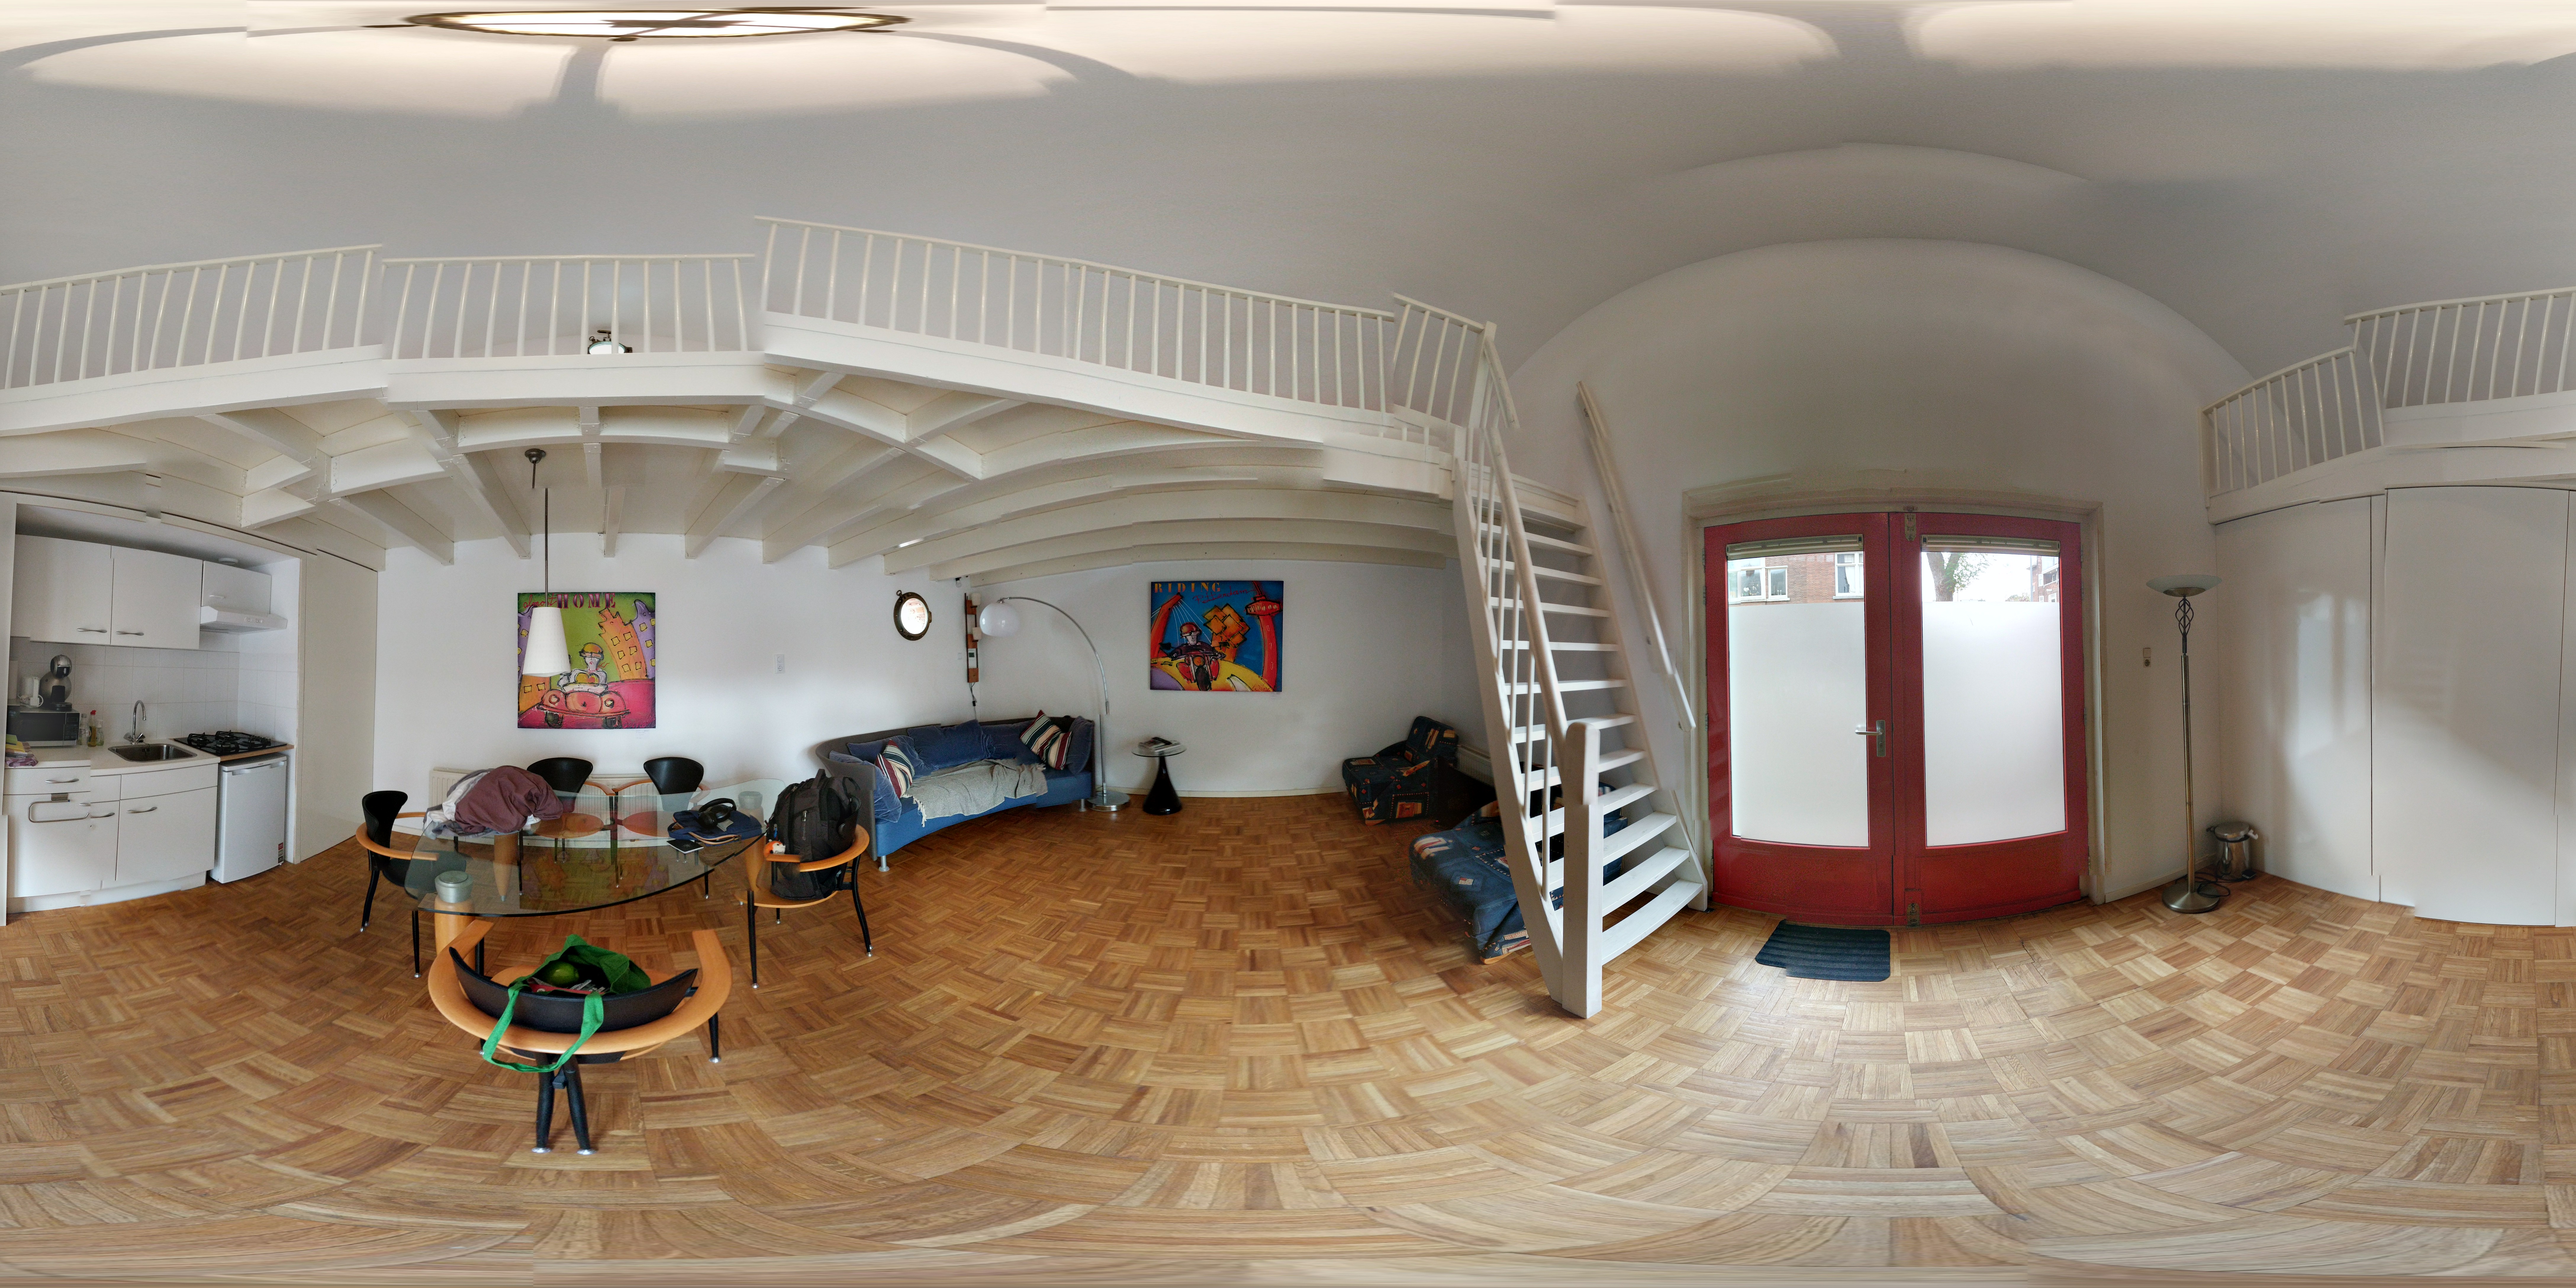 A badly stitched panorama of a cosy under-bridge apartment.